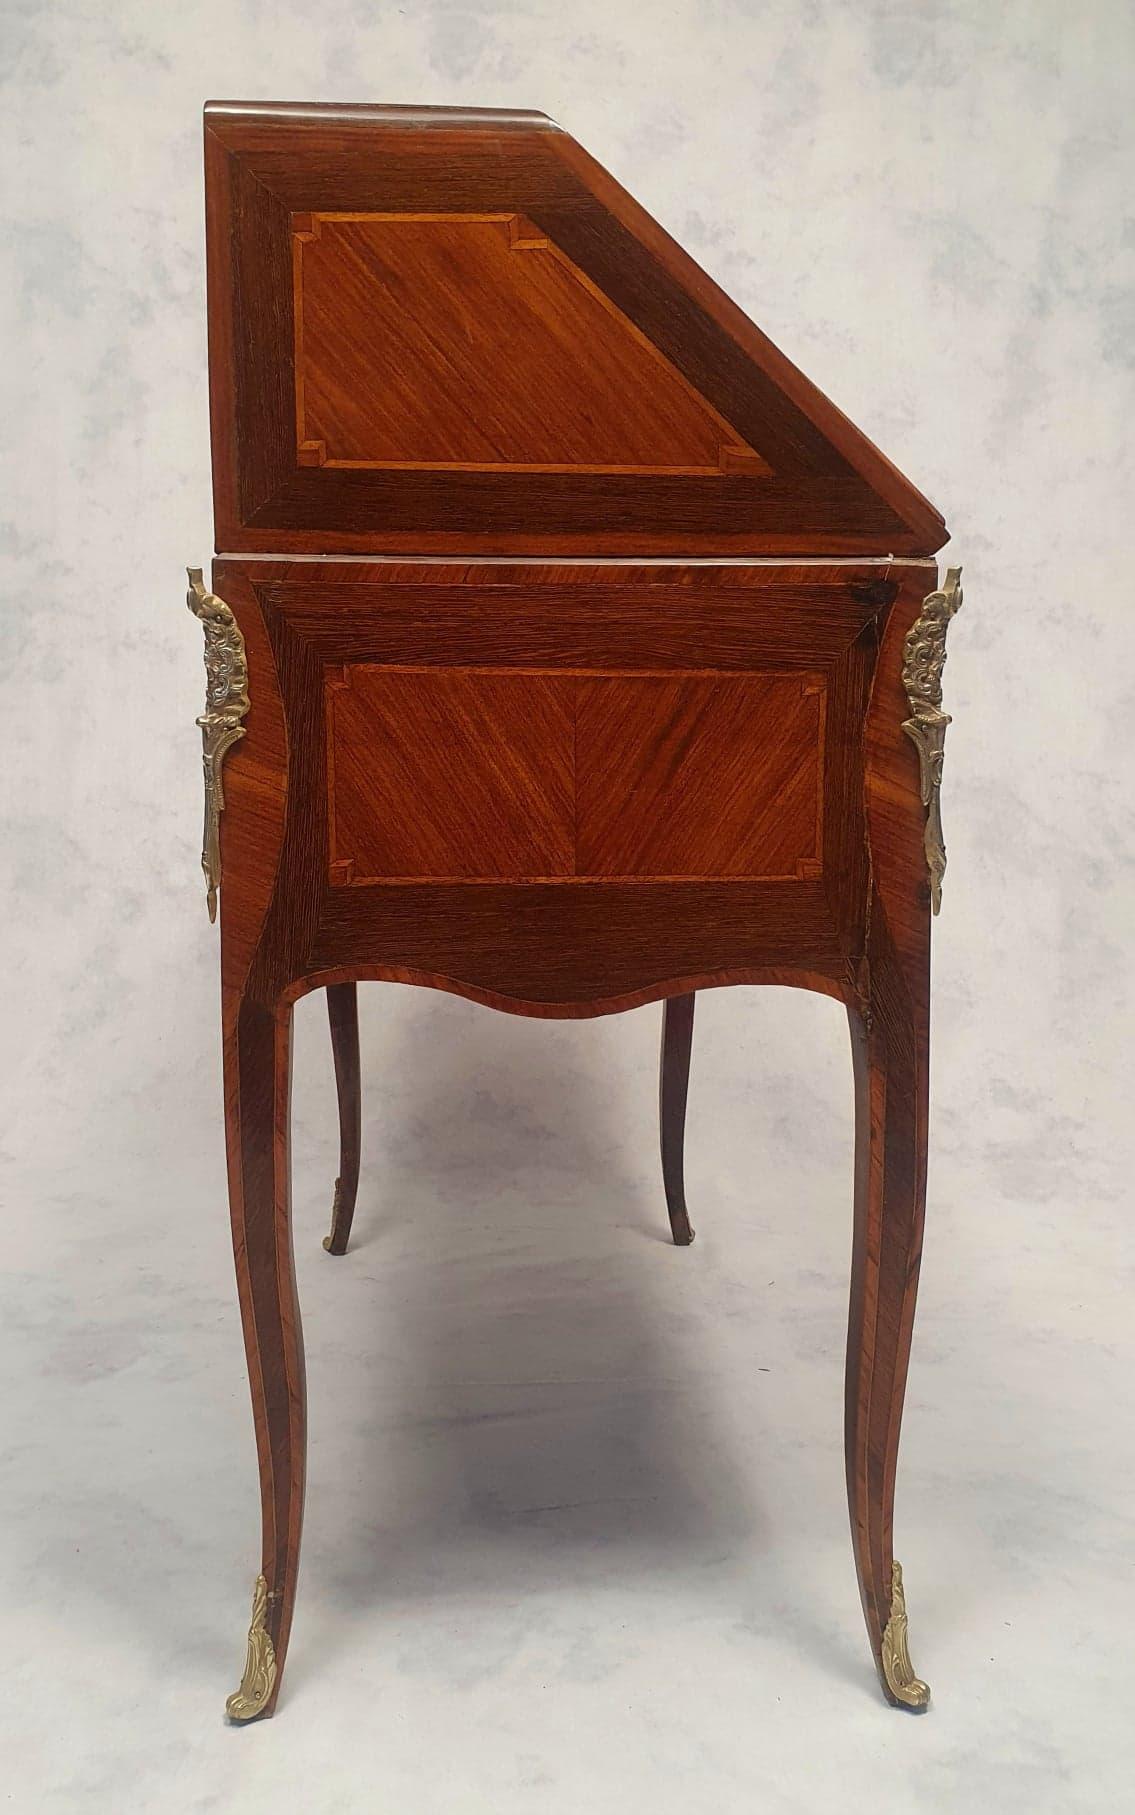 Inlay Secretary Period Transition Louis XV, Louis XVI, Palissander & Rosewood, 18th For Sale